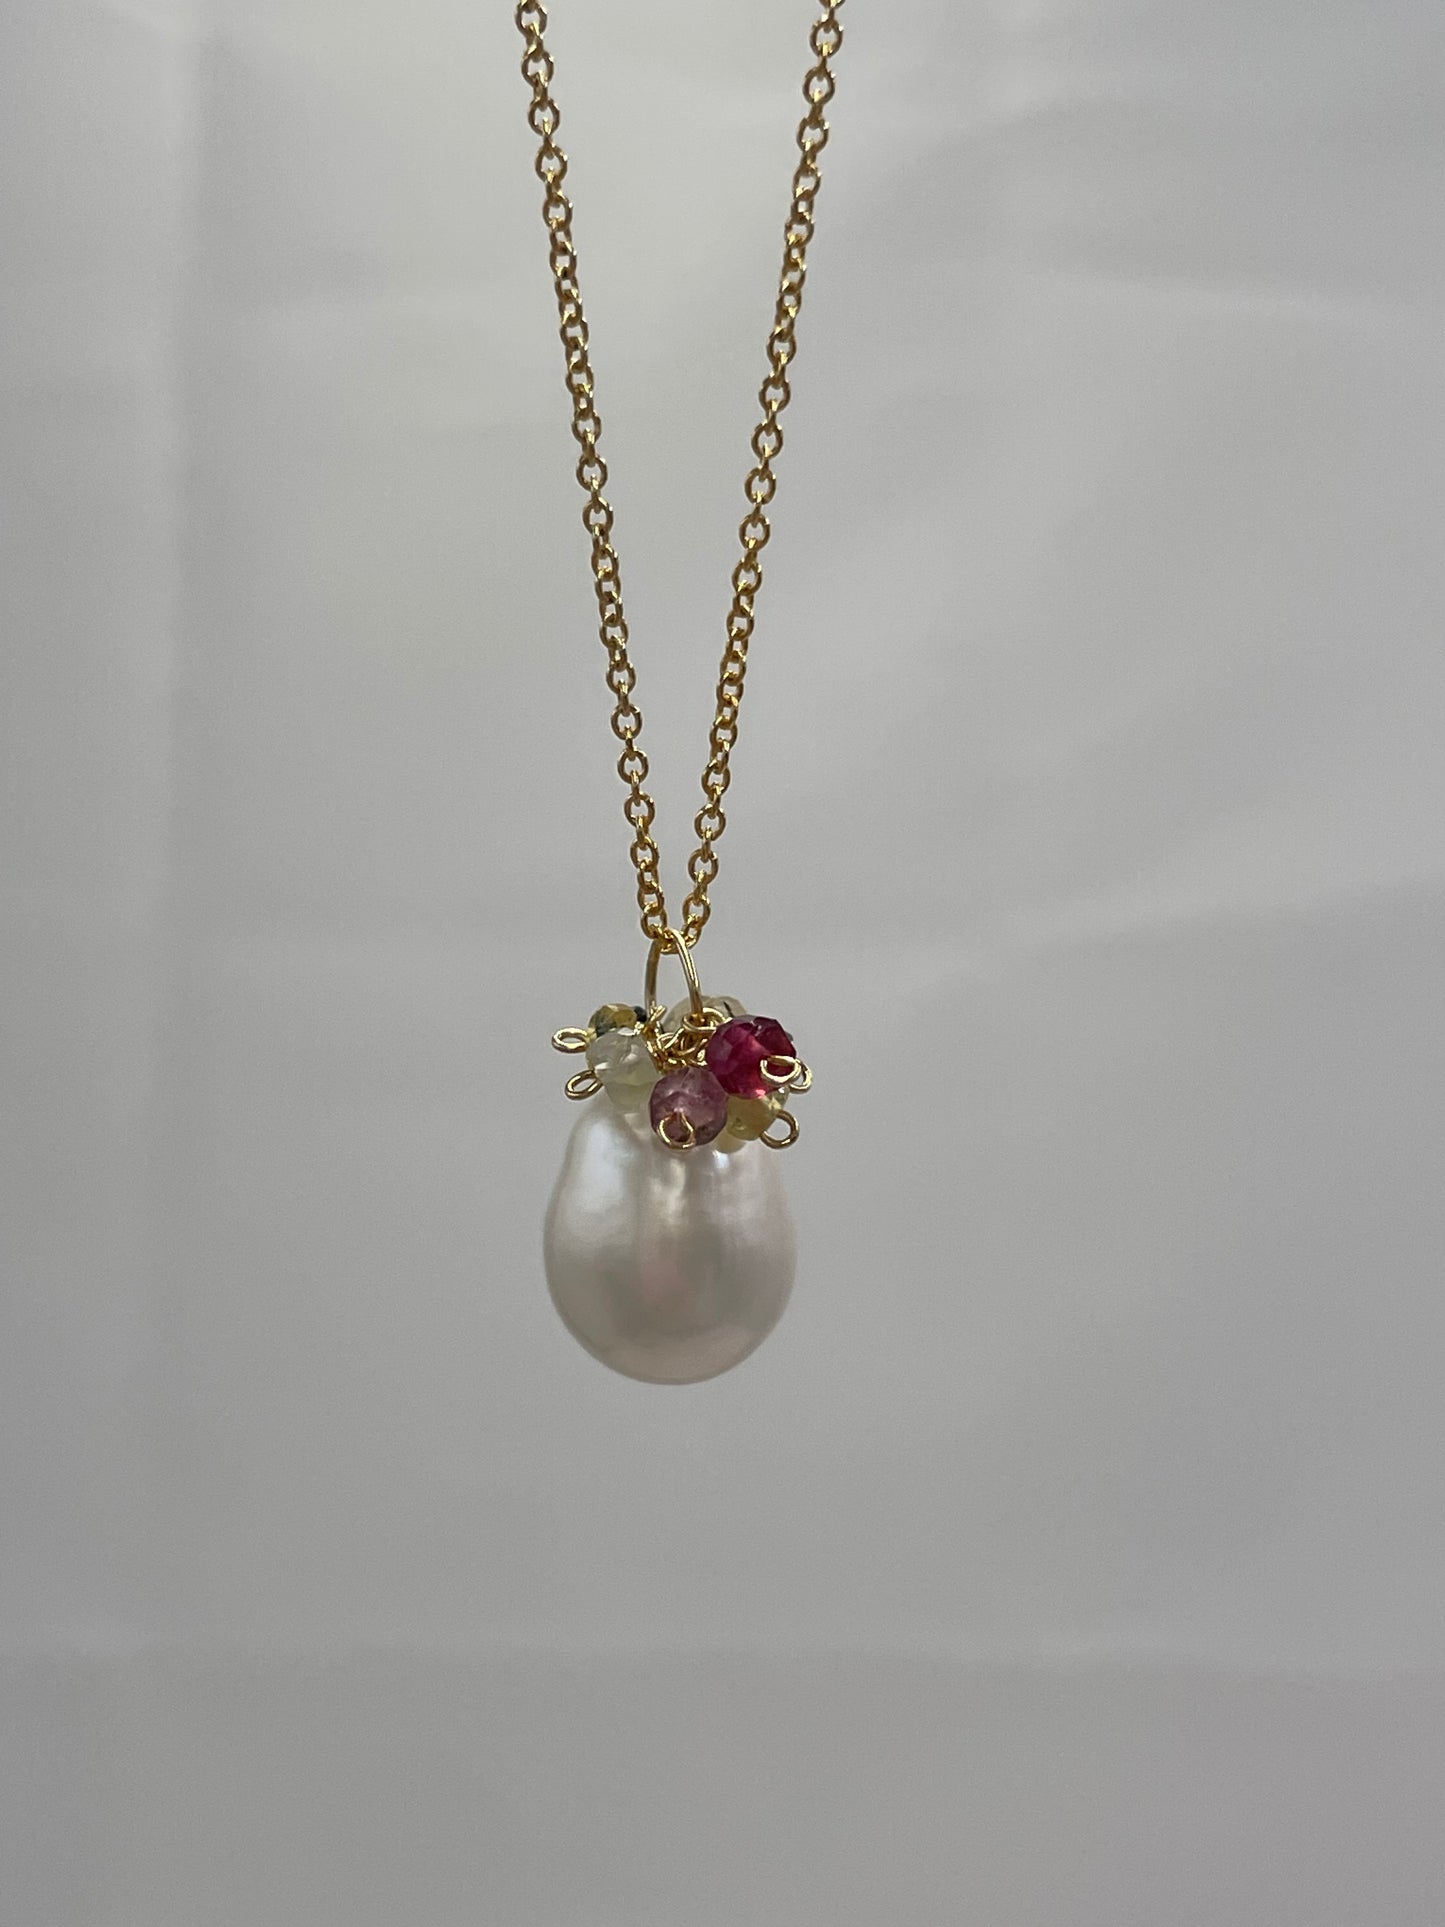 Baroque Pearl Pendant with Gemstone Cluster